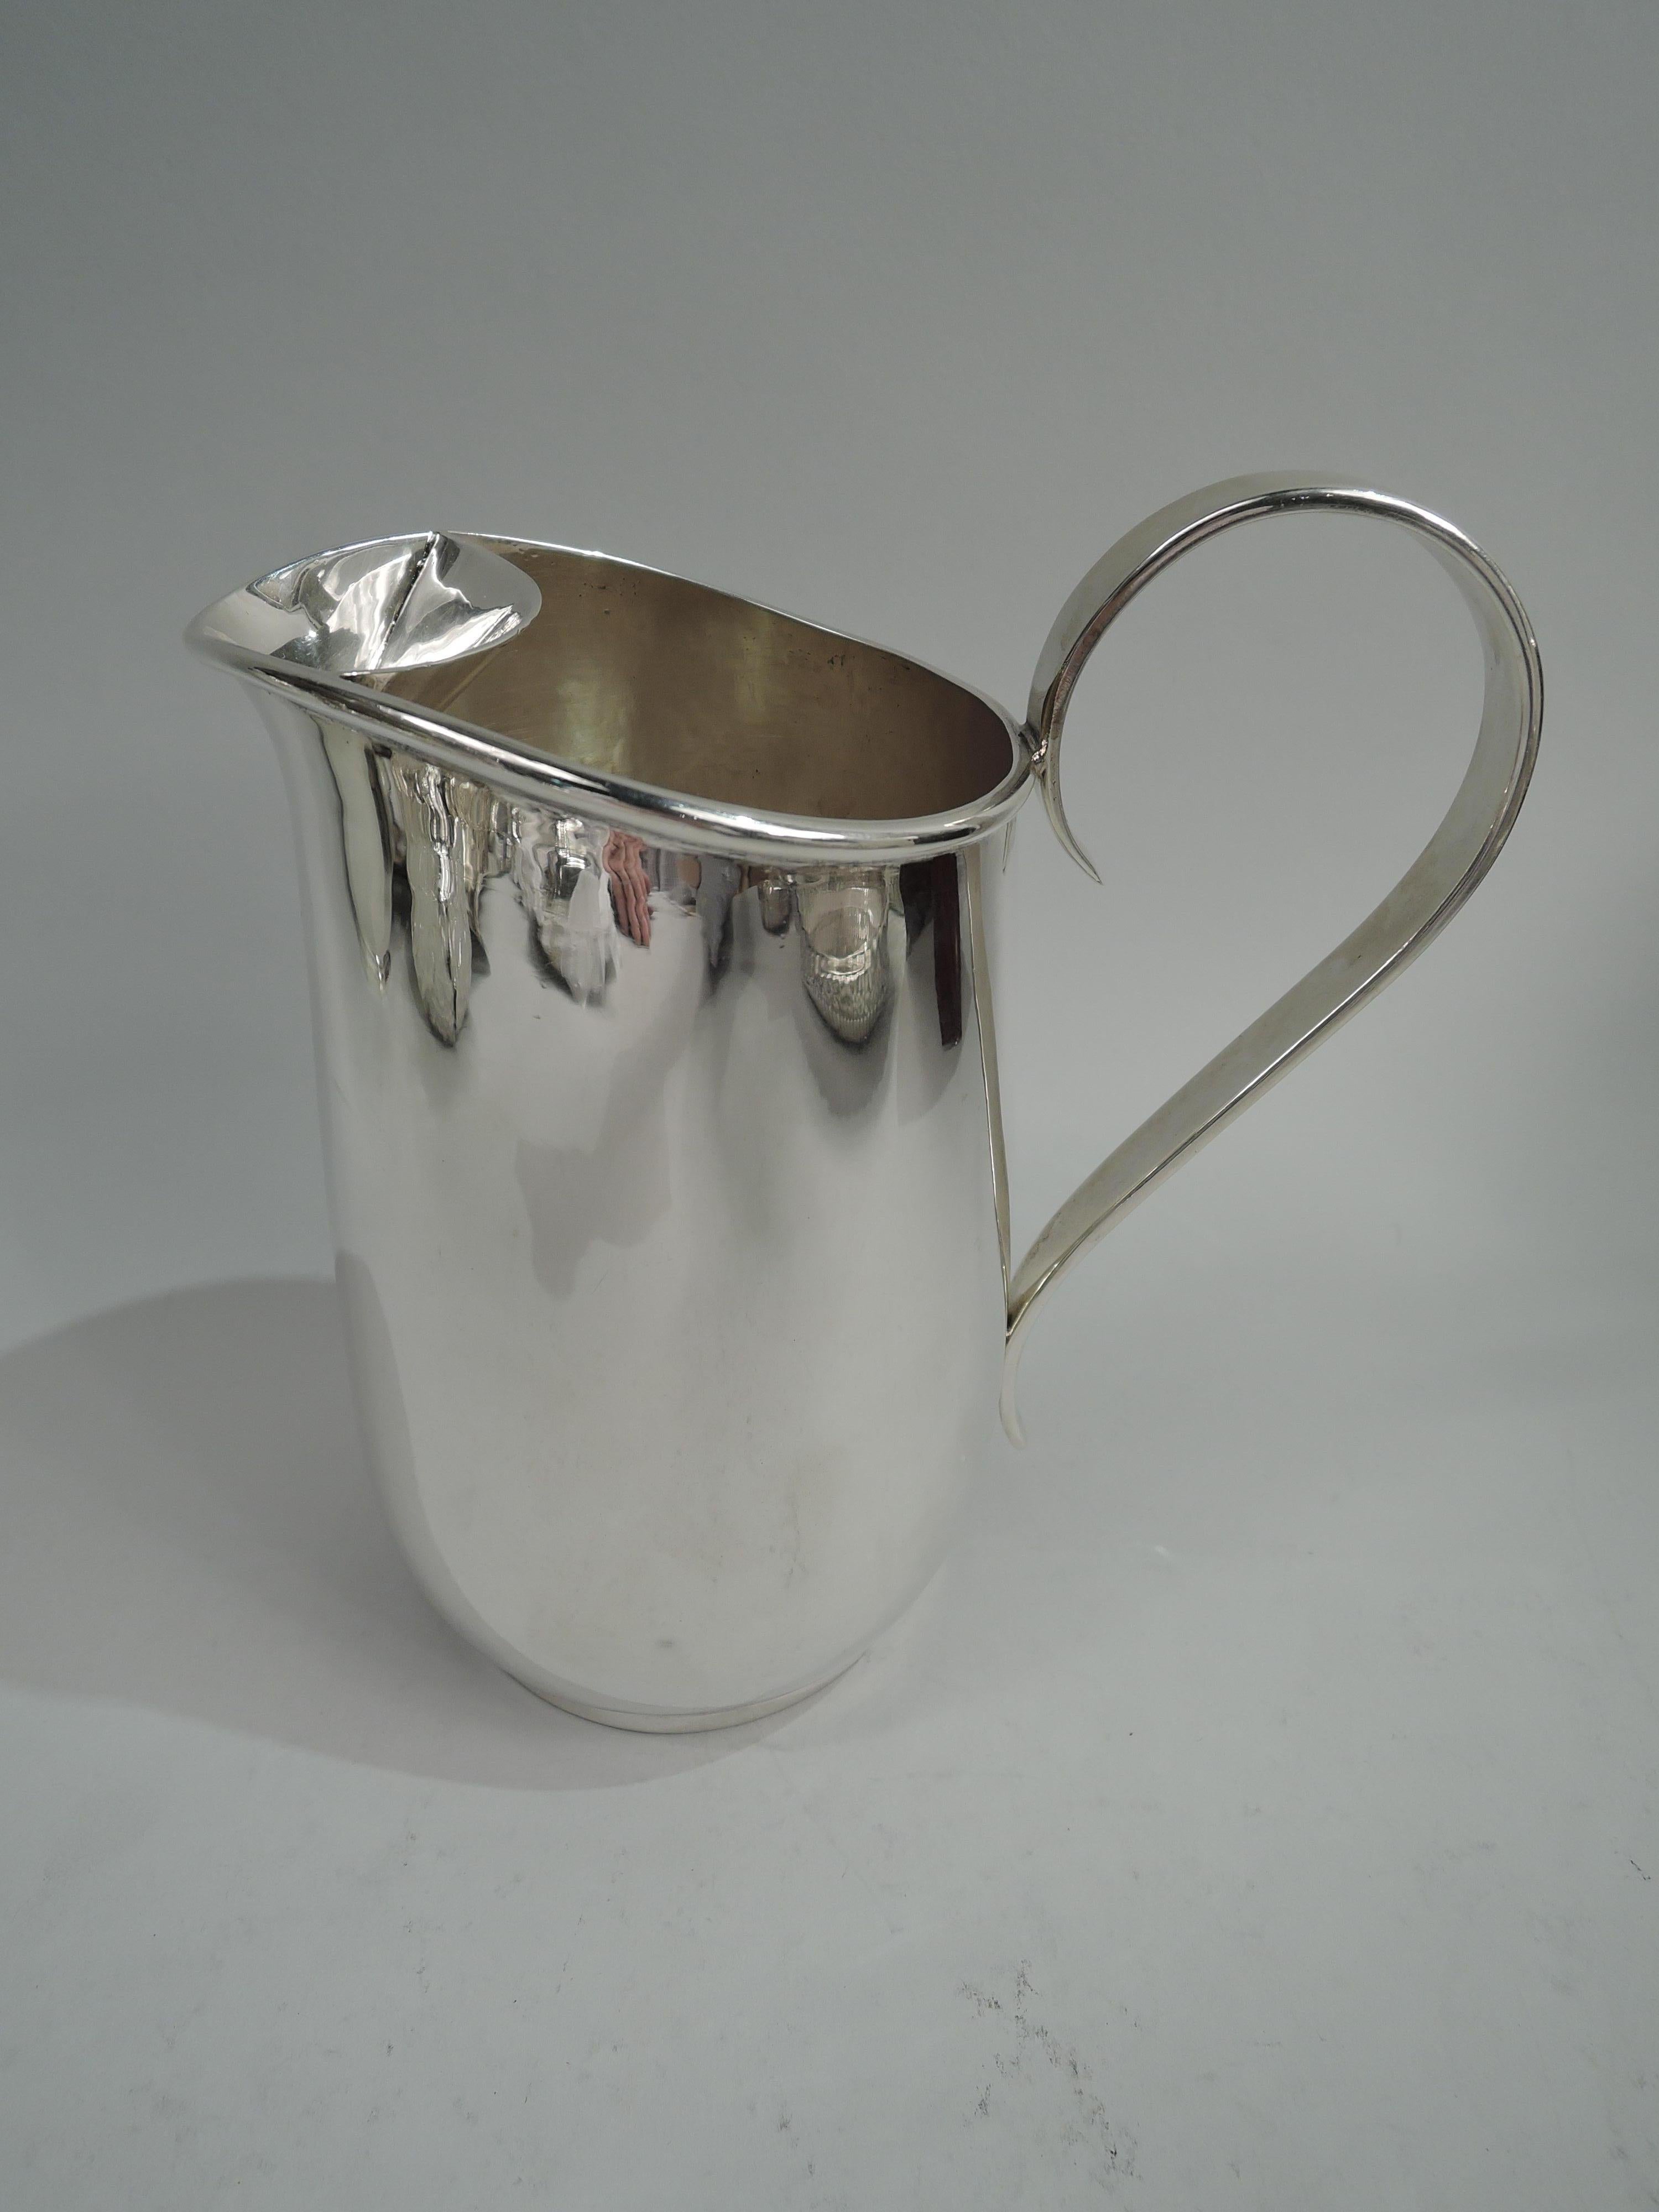 American Mid-Century Modern sterling silver bar pitcher. Round with gently curved sides, short and inset foot ring, and high looping handle. Mouth has lip spout and ice guard. Stylish barware with visible handwork on interior. Perfect for your own